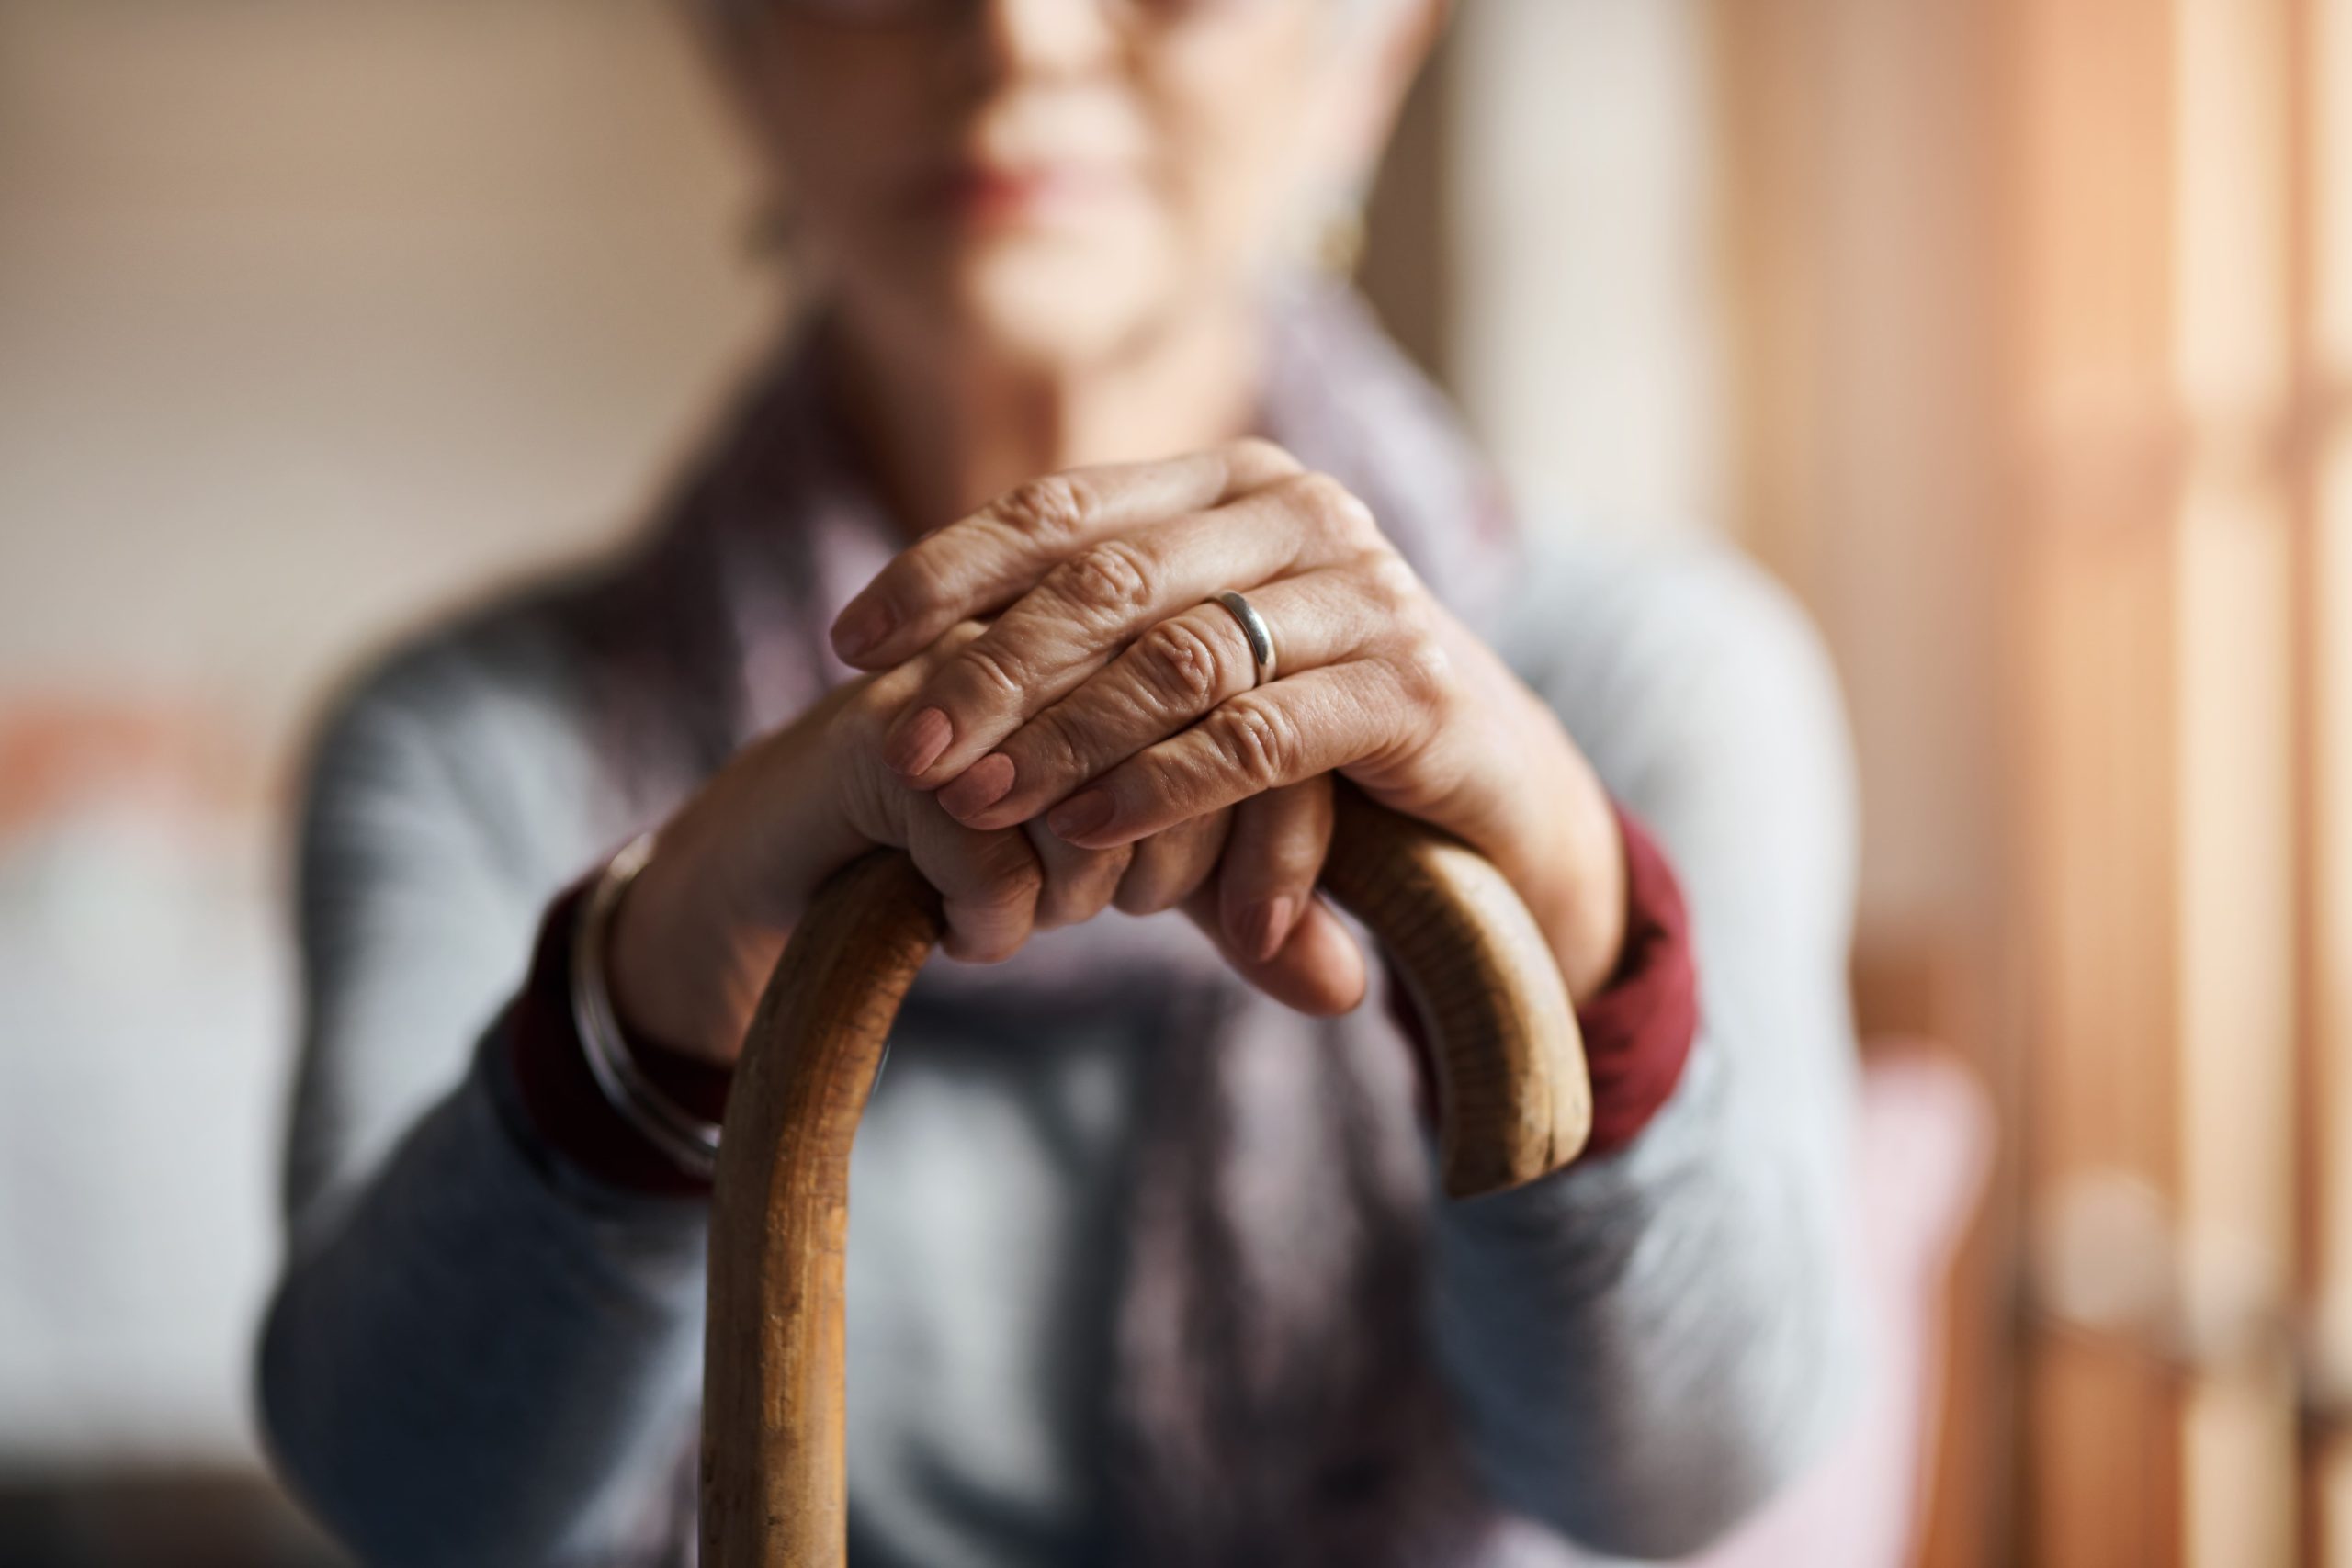 An elderly woman sitting down while holding a cane out in front of herself, both hands are resting on top of the cane.